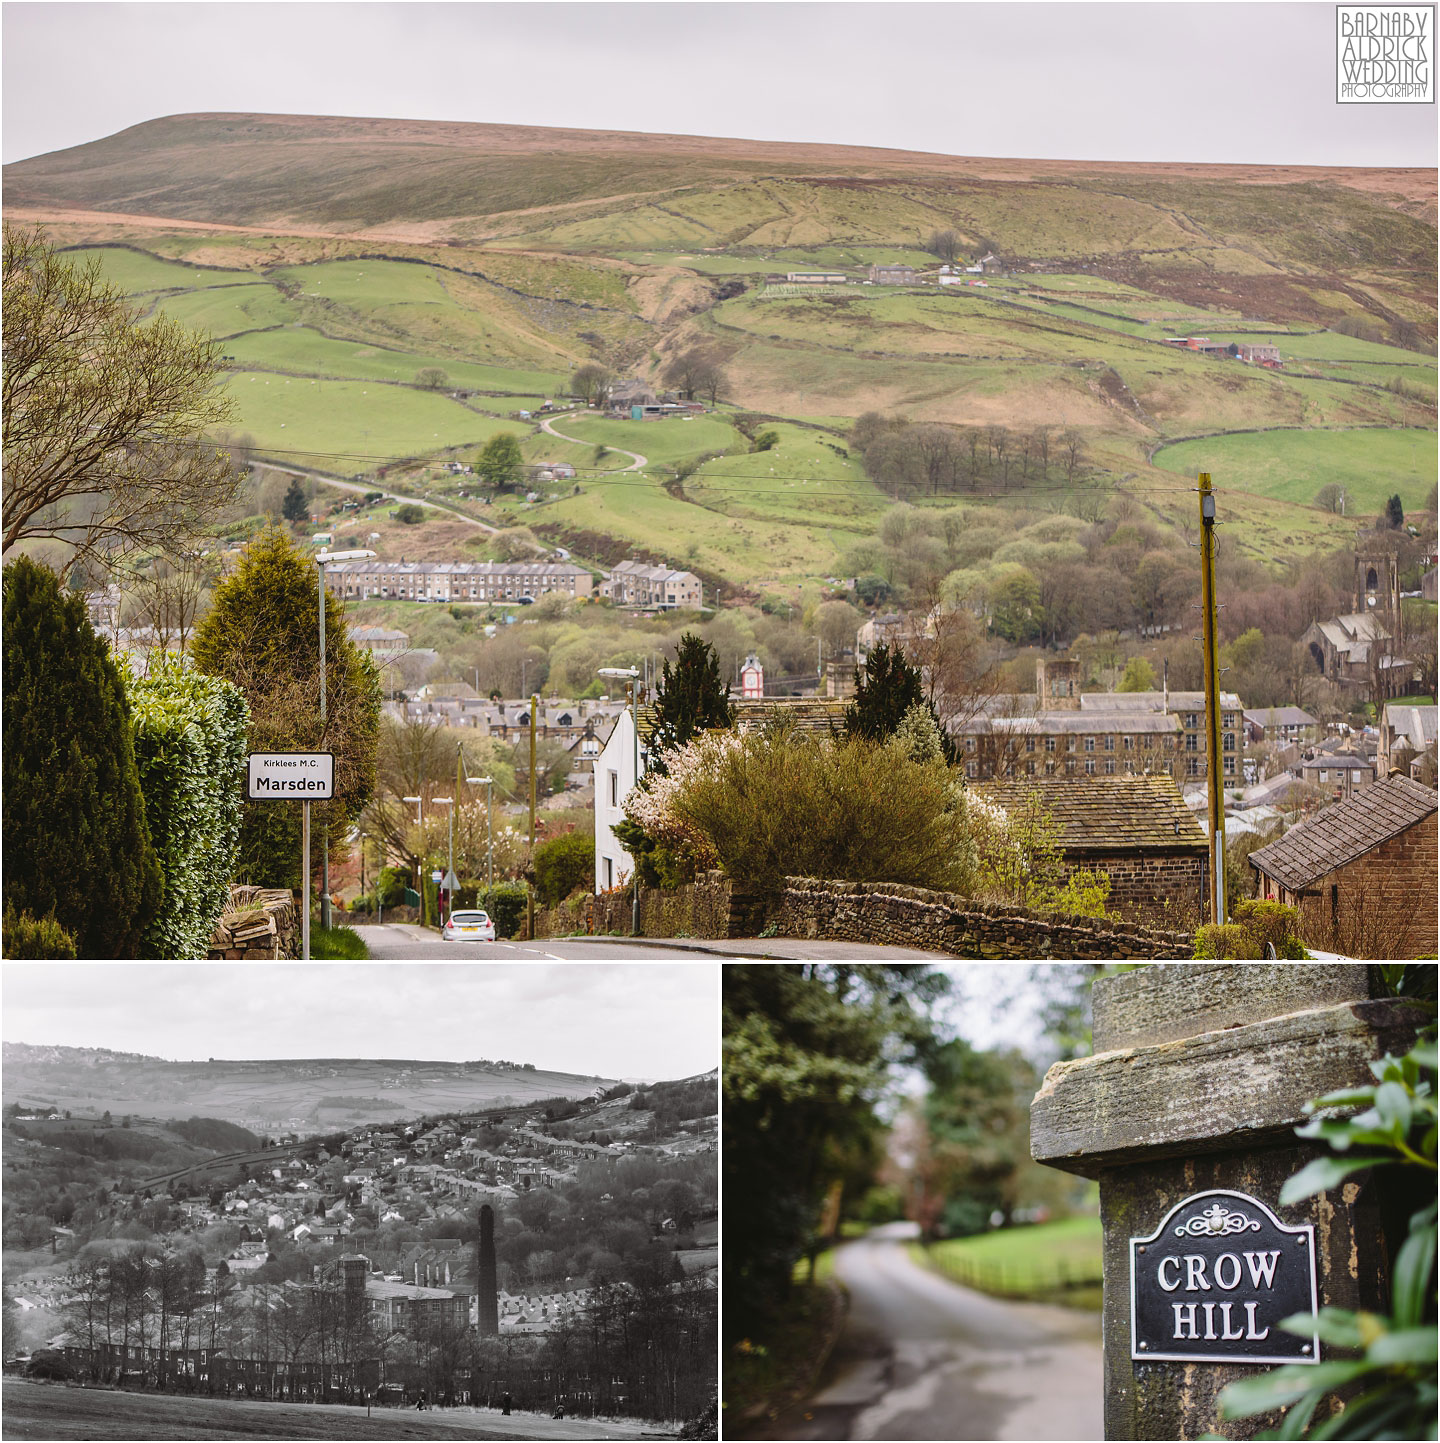 Crow Hill in Marsden in South Yorkshire, by Photographer Barnaby Aldrick